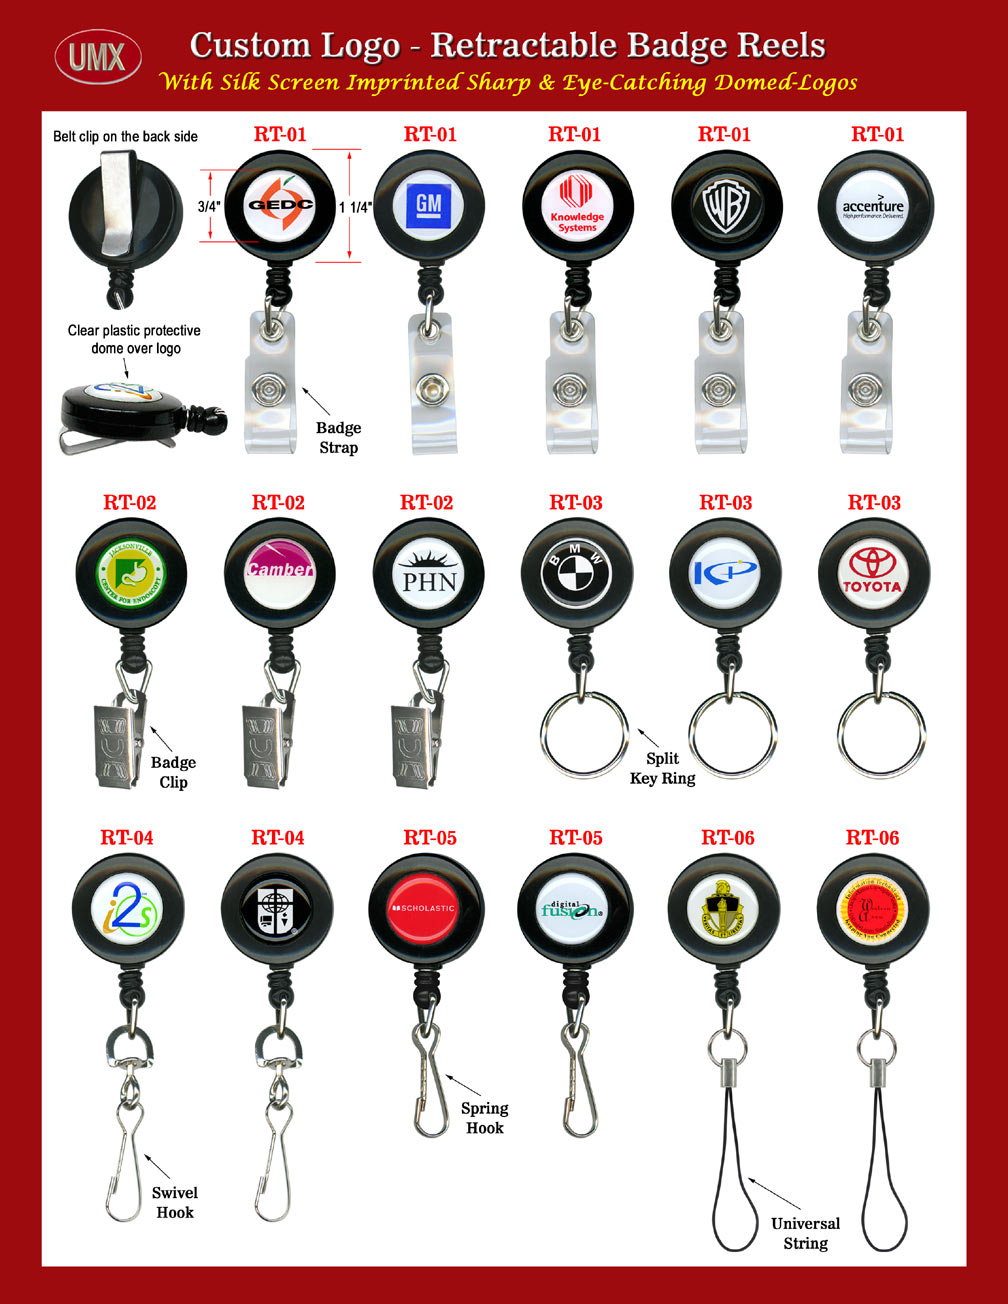 Full Color Imprinted Custom Retractable ID Holders - Production Sample 1